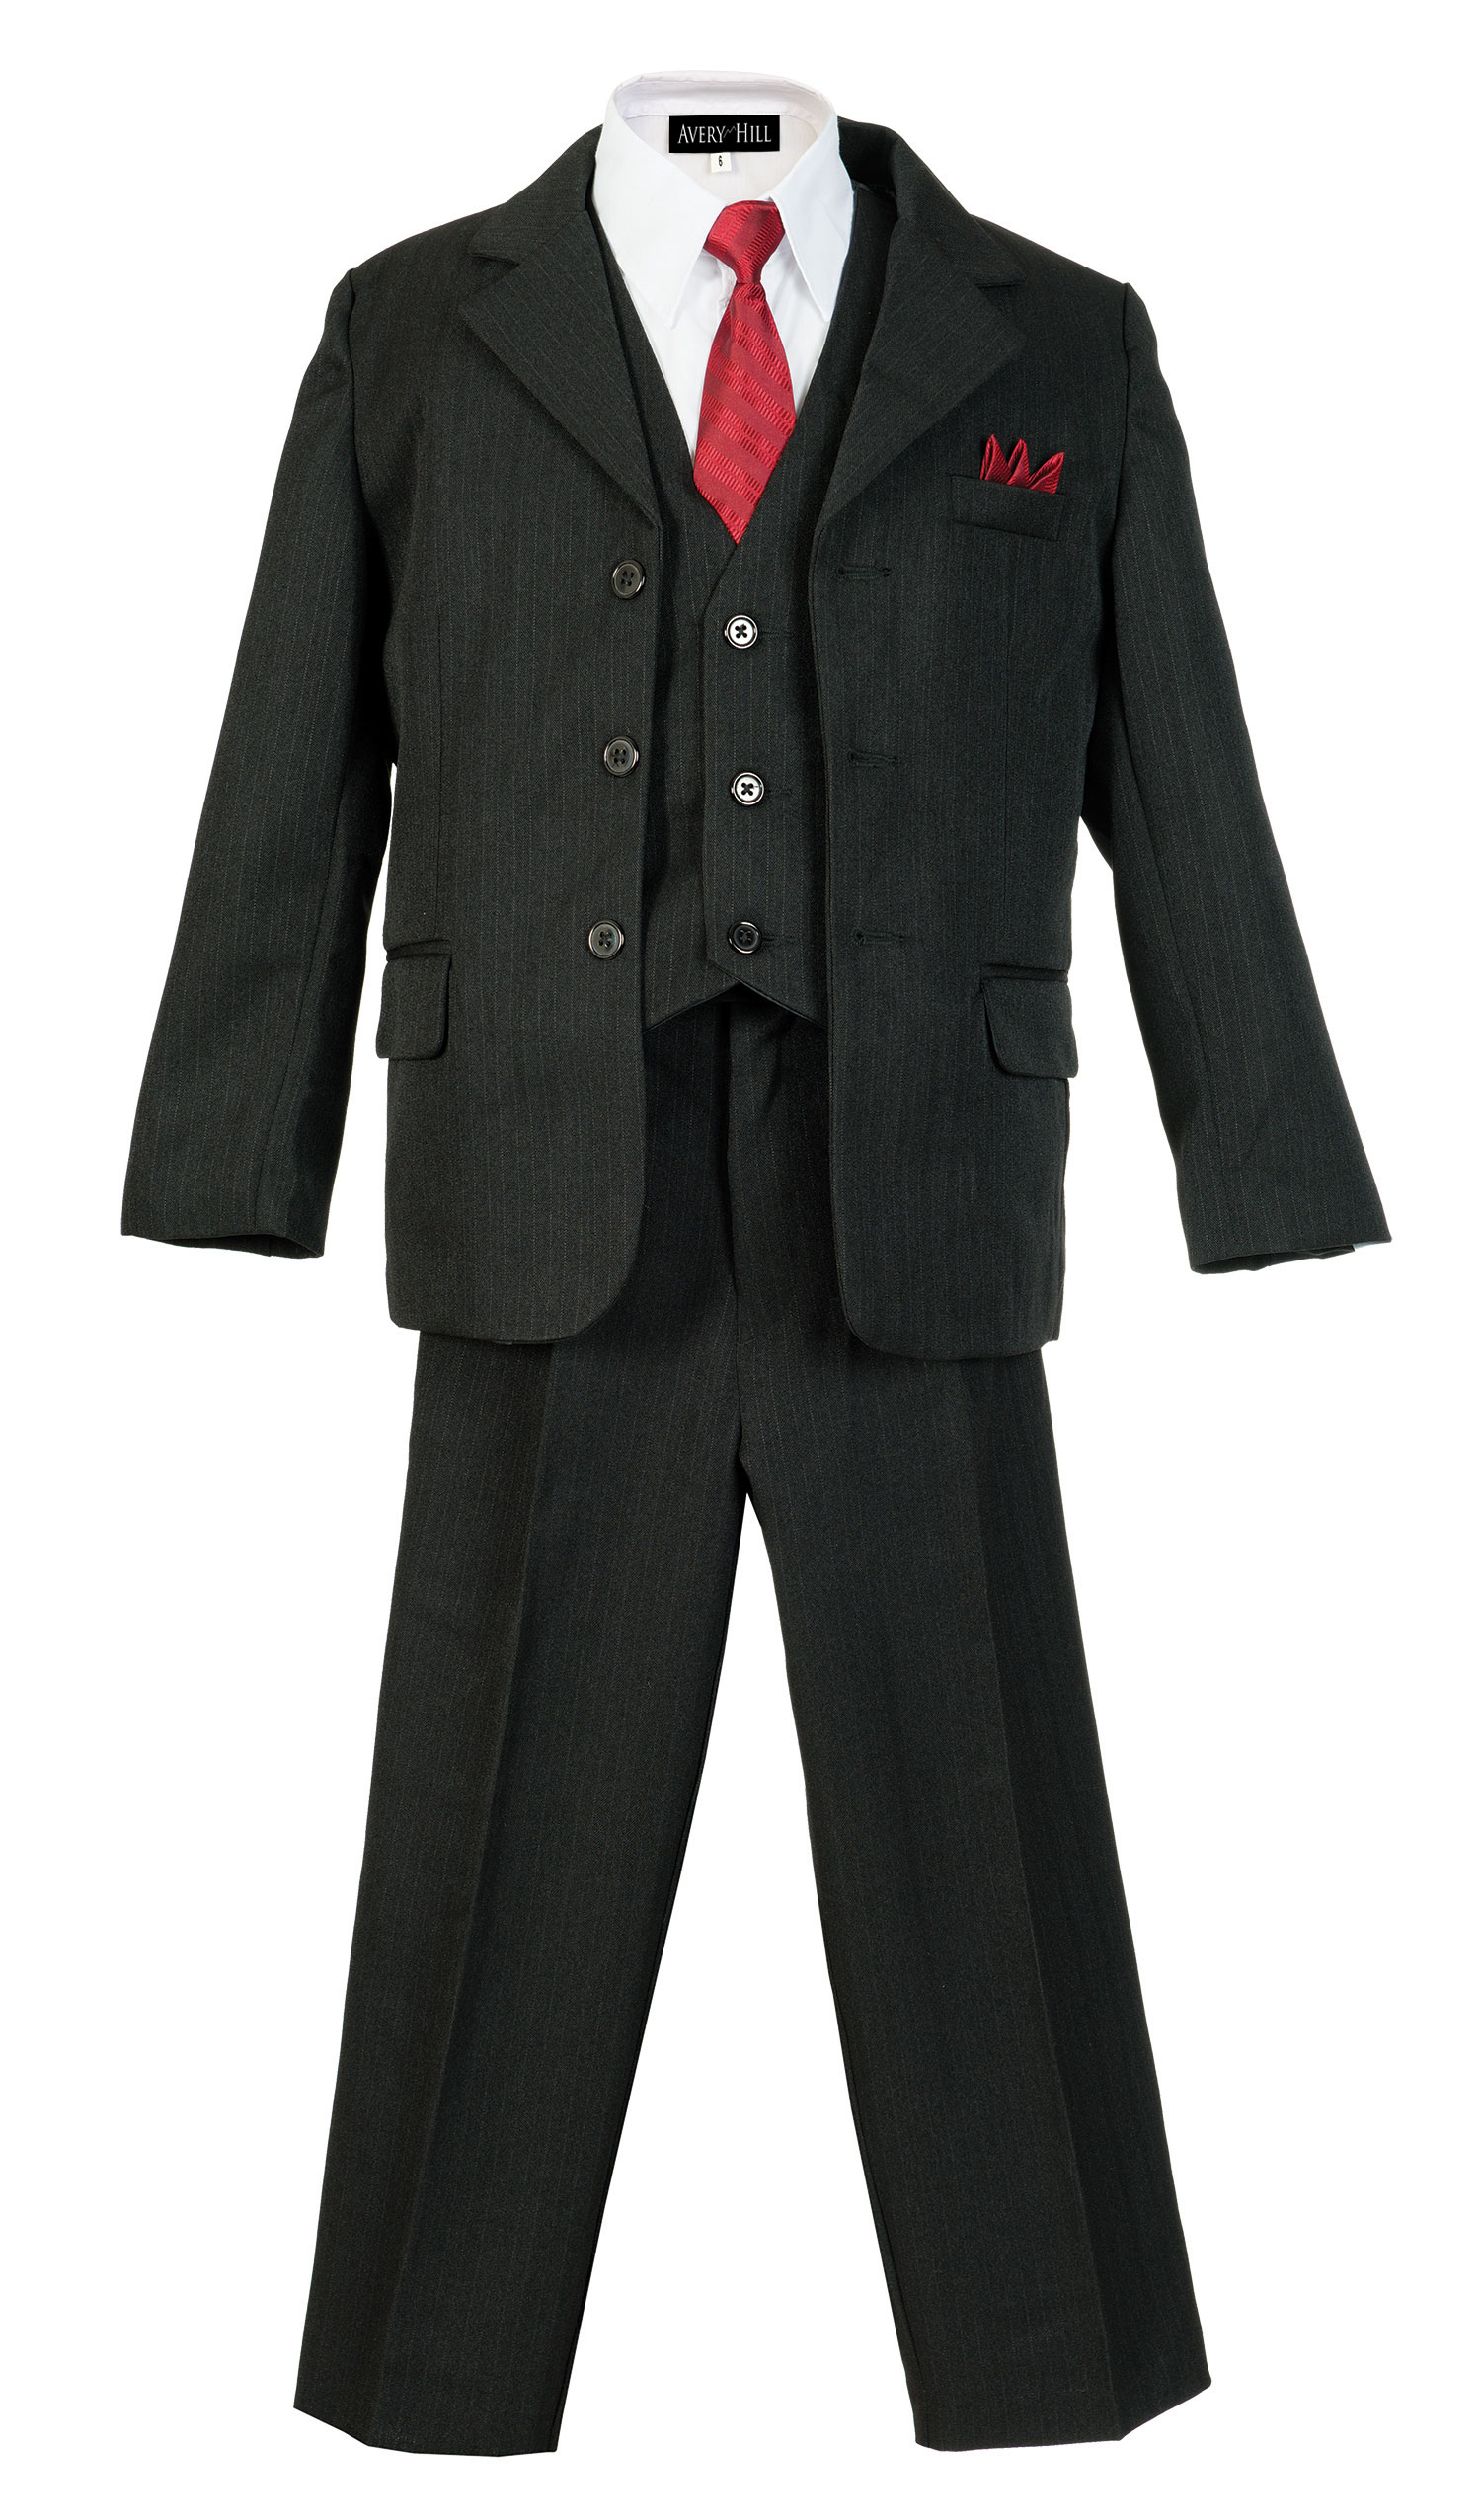 Boys Pinstripe Suit Set with Matching Tie BK 8